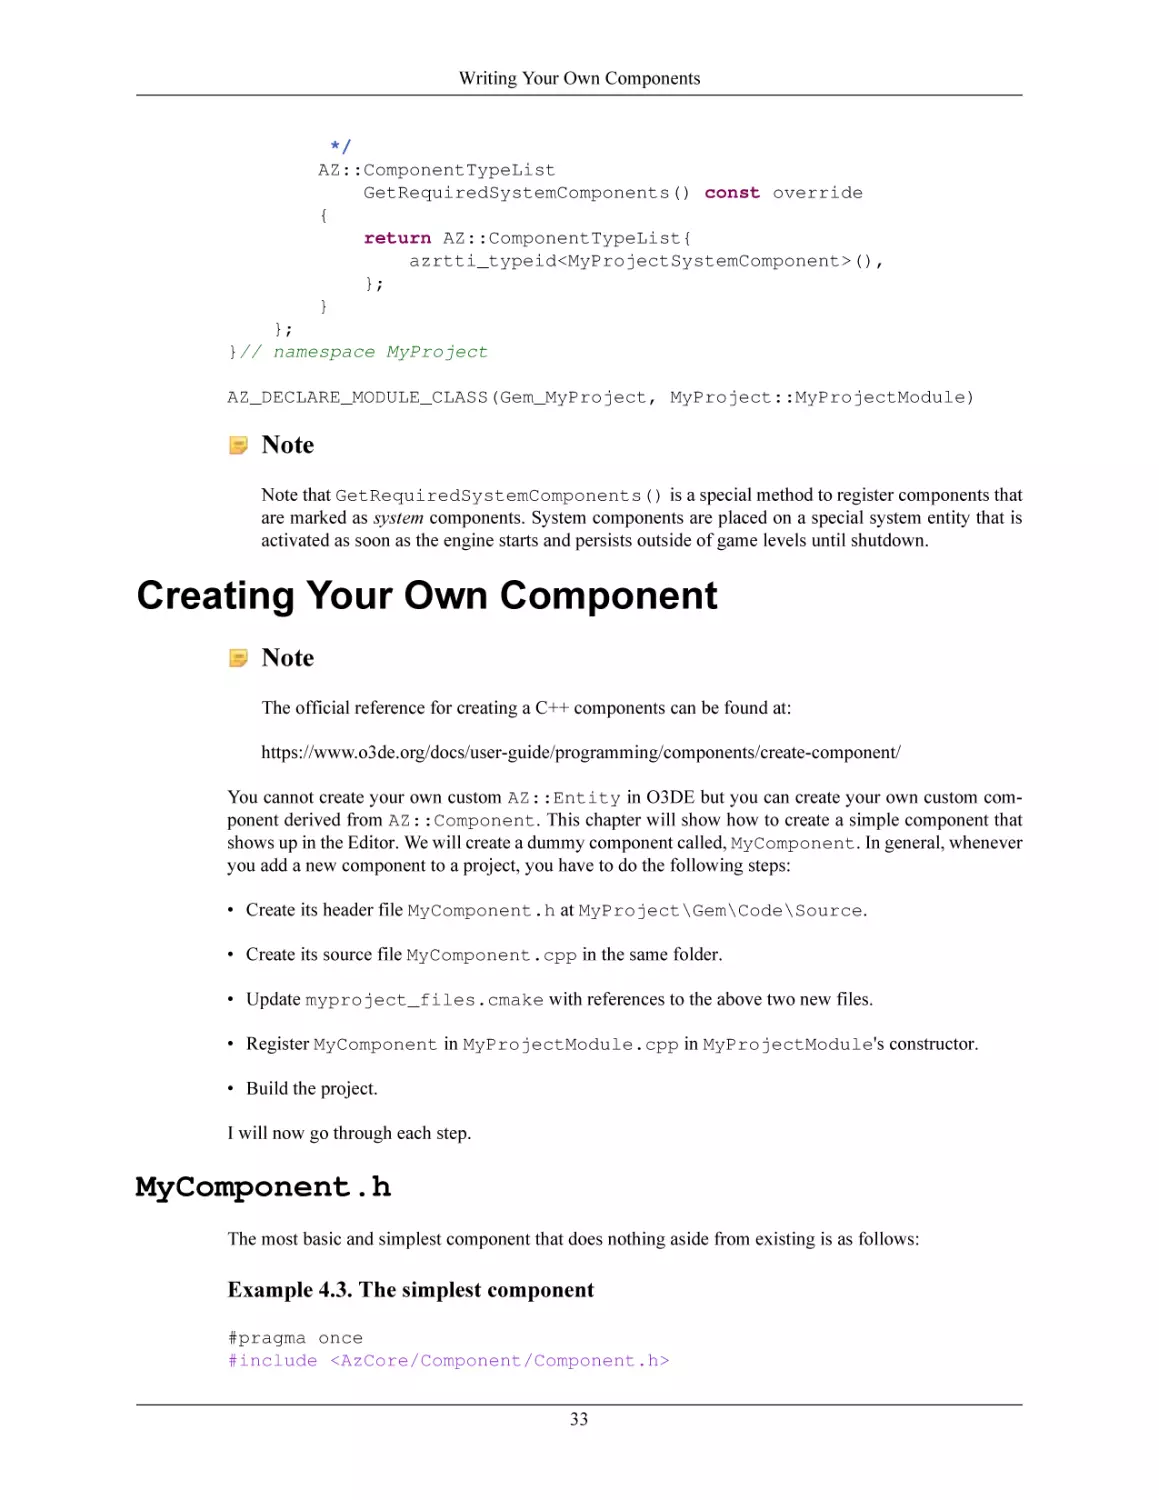 Creating Your Own Component
MyComponent.h